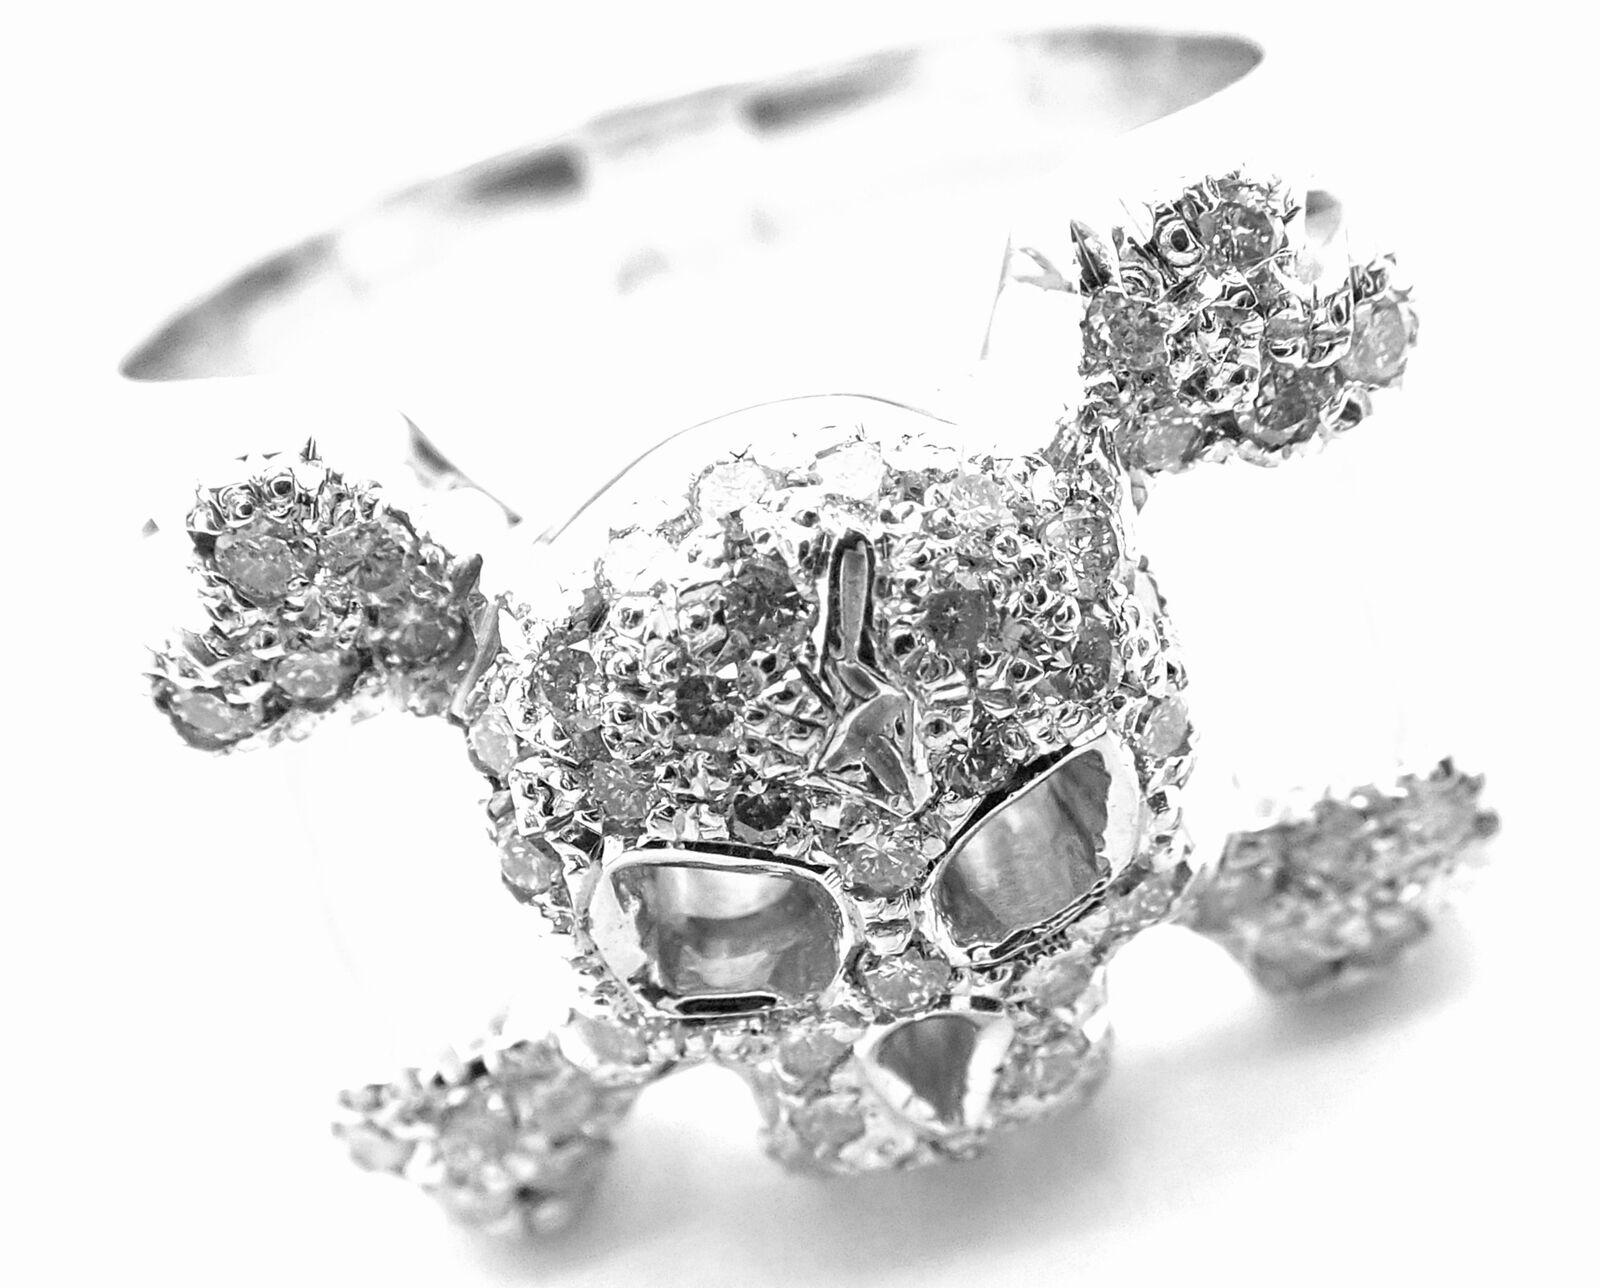 18k White Gold Diamond Skull Crossbones Ring by Loree Rodkin. 
With  50 Round Brilliant cut diamonds G color, VSI clarity total weight approximately .50ctw  
Details: 
Size: 6
Weight: 14.2 grams
Width: 13mm
Stamped Hallmarks: LR 18k
*Free Shipping